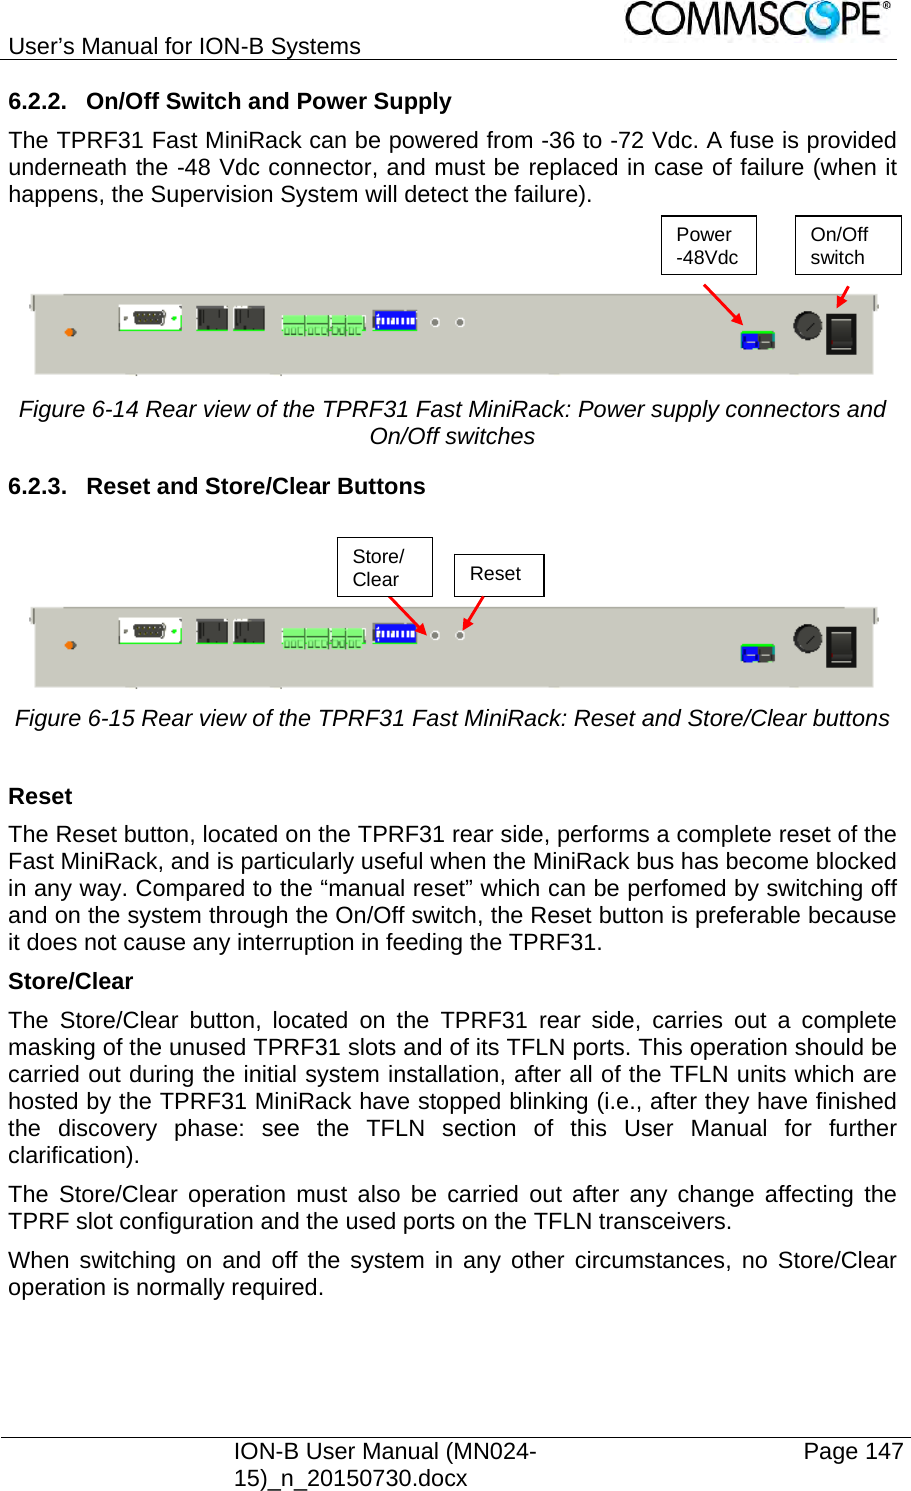 User’s Manual for ION-B Systems    ION-B User Manual (MN024-15)_n_20150730.docx  Page 147 6.2.2.  On/Off Switch and Power Supply The TPRF31 Fast MiniRack can be powered from -36 to -72 Vdc. A fuse is provided underneath the -48 Vdc connector, and must be replaced in case of failure (when it happens, the Supervision System will detect the failure).    Figure 6-14 Rear view of the TPRF31 Fast MiniRack: Power supply connectors and On/Off switches 6.2.3.  Reset and Store/Clear Buttons     Figure 6-15 Rear view of the TPRF31 Fast MiniRack: Reset and Store/Clear buttons  Reset The Reset button, located on the TPRF31 rear side, performs a complete reset of the Fast MiniRack, and is particularly useful when the MiniRack bus has become blocked in any way. Compared to the “manual reset” which can be perfomed by switching off and on the system through the On/Off switch, the Reset button is preferable because it does not cause any interruption in feeding the TPRF31. Store/Clear The Store/Clear button, located on the TPRF31 rear side, carries out a complete masking of the unused TPRF31 slots and of its TFLN ports. This operation should be carried out during the initial system installation, after all of the TFLN units which are hosted by the TPRF31 MiniRack have stopped blinking (i.e., after they have finished the discovery phase: see the TFLN section of this User Manual for further clarification). The Store/Clear operation must also be carried out after any change affecting the TPRF slot configuration and the used ports on the TFLN transceivers. When switching on and off the system in any other circumstances, no Store/Clear operation is normally required.  On/Off  switchPower -48Vdc Reset Store/Clear